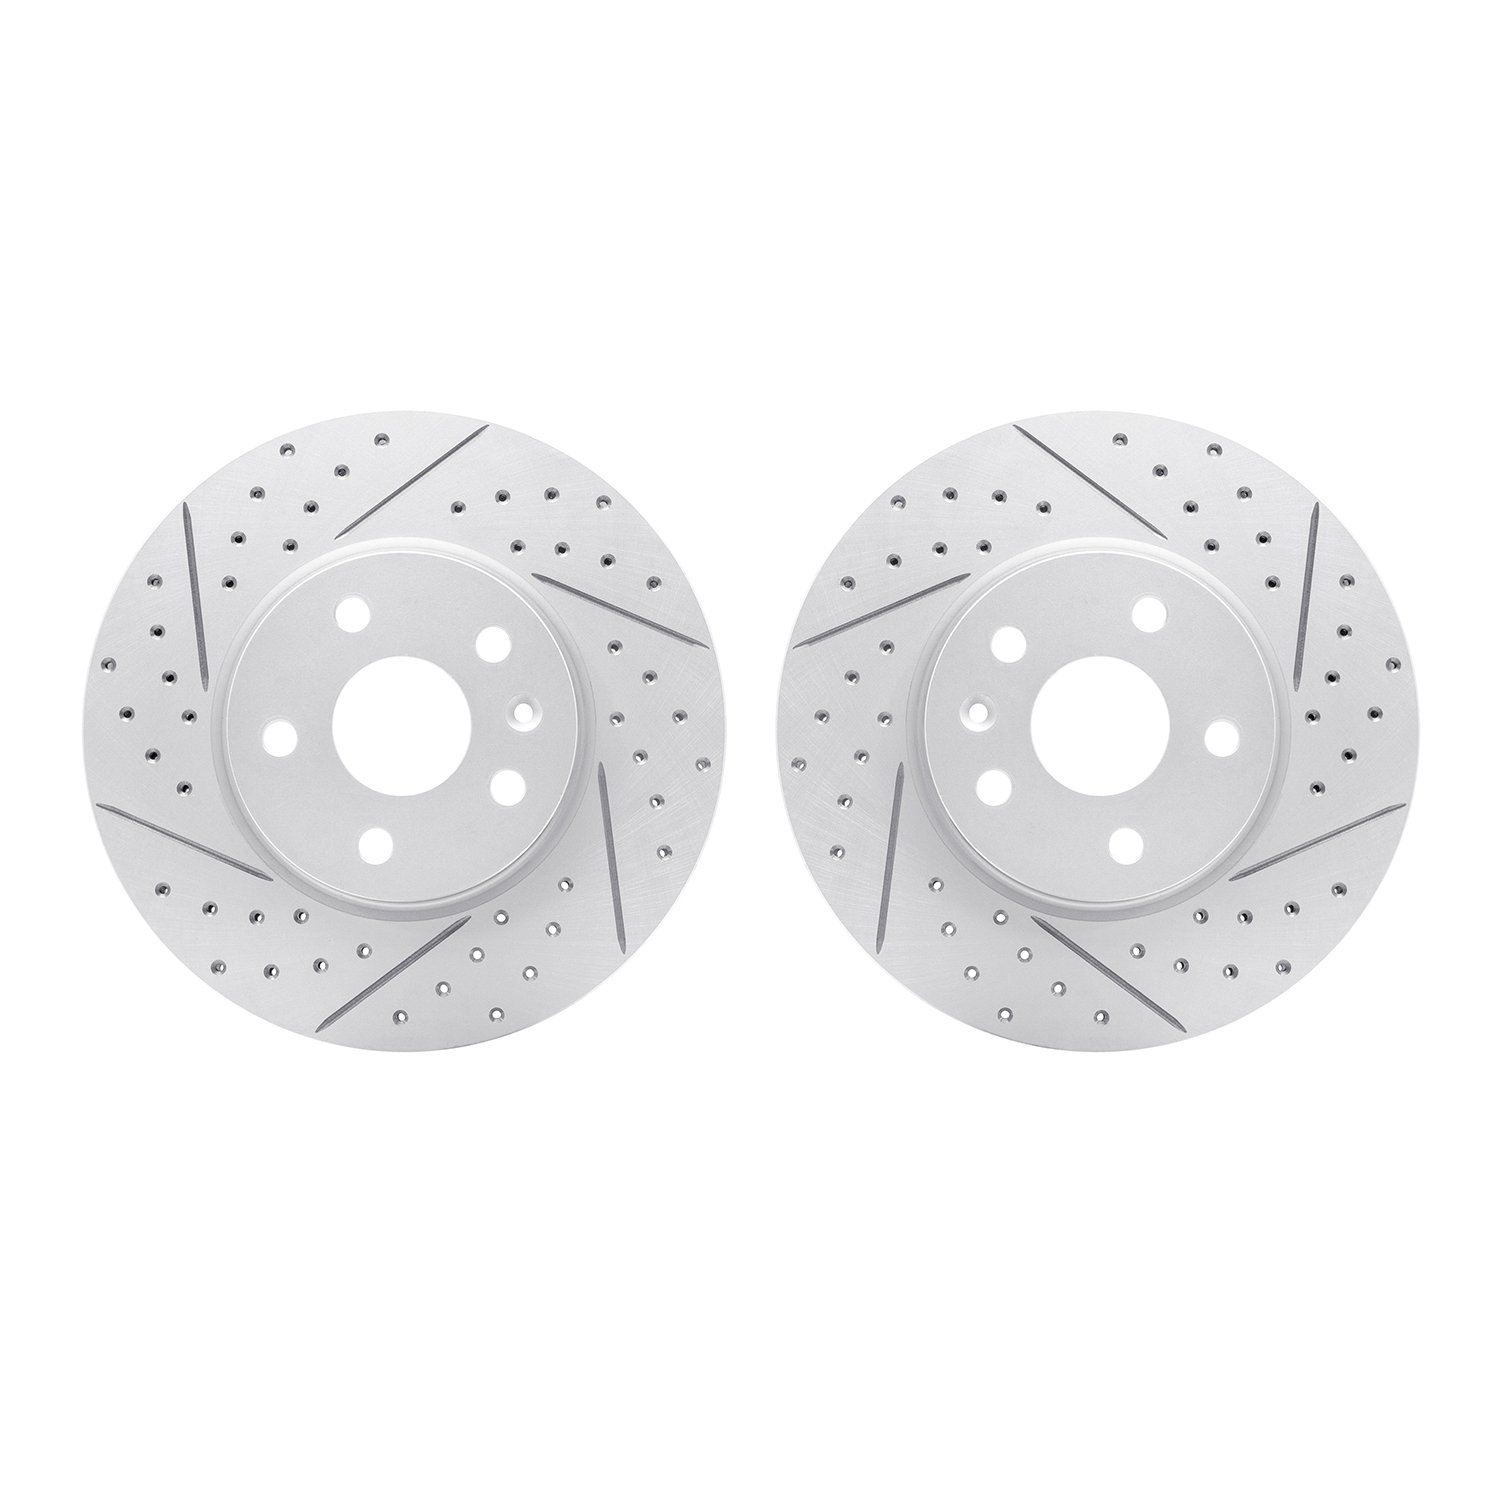 2002-45000 Geoperformance Drilled/Slotted Brake Rotors, Fits Select GM, Position: Front